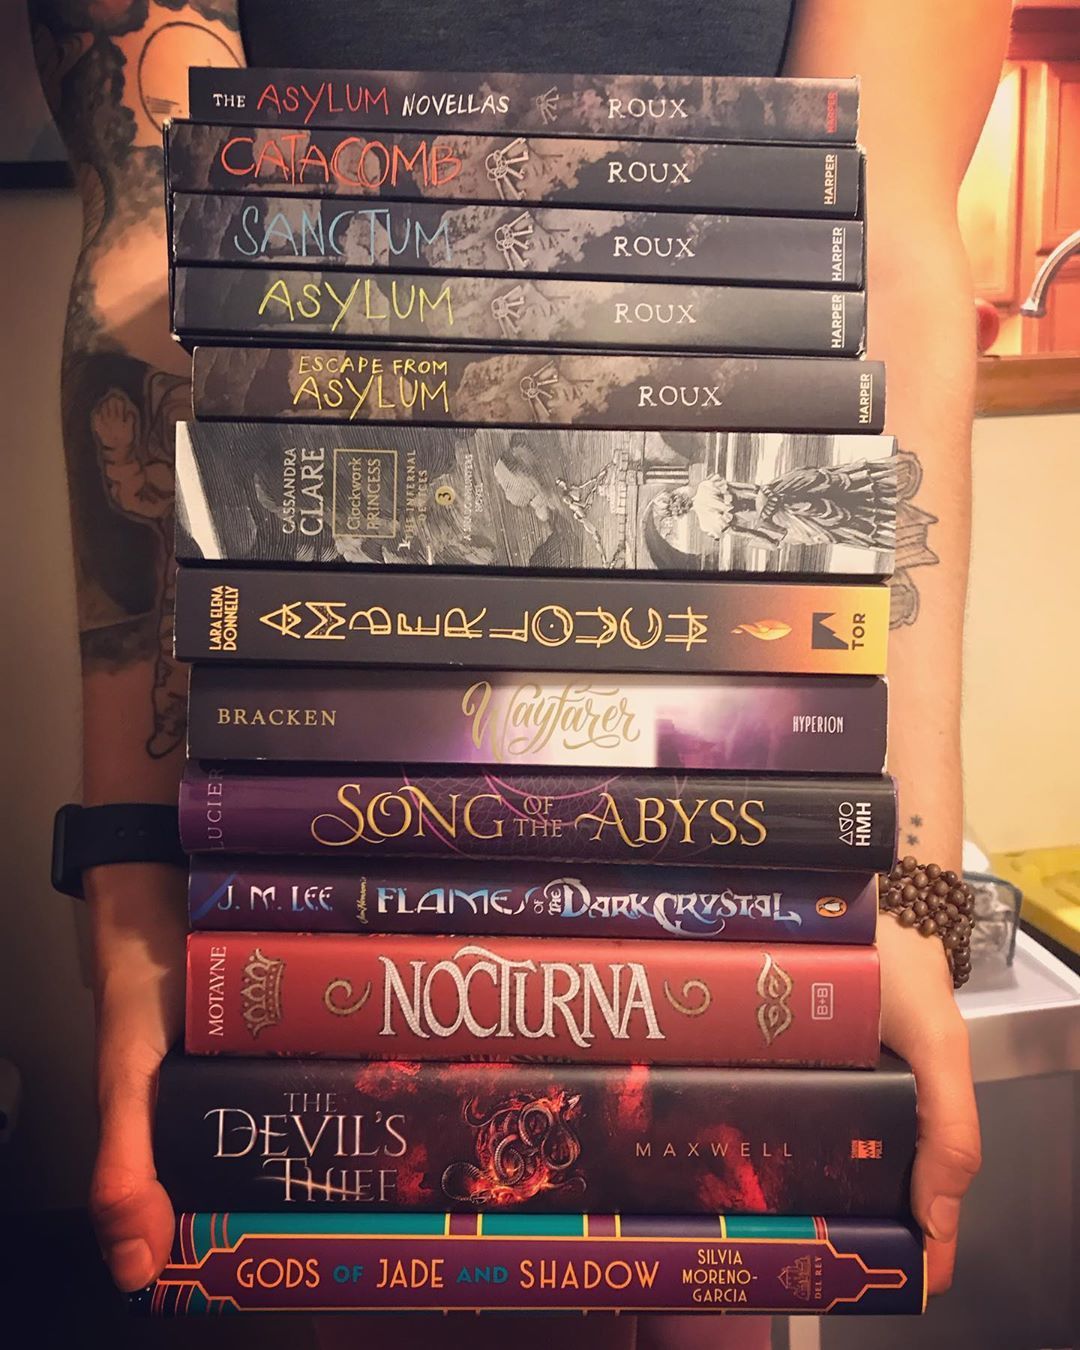 I just hauled a TON of new books, and I am so excited to add them to my physical TBR. Three sequels, FIVE new Madeleine Roux books for Halloween, two preorders, and three just for fun! Iâm going to have to find a way to fit these into my schedule...